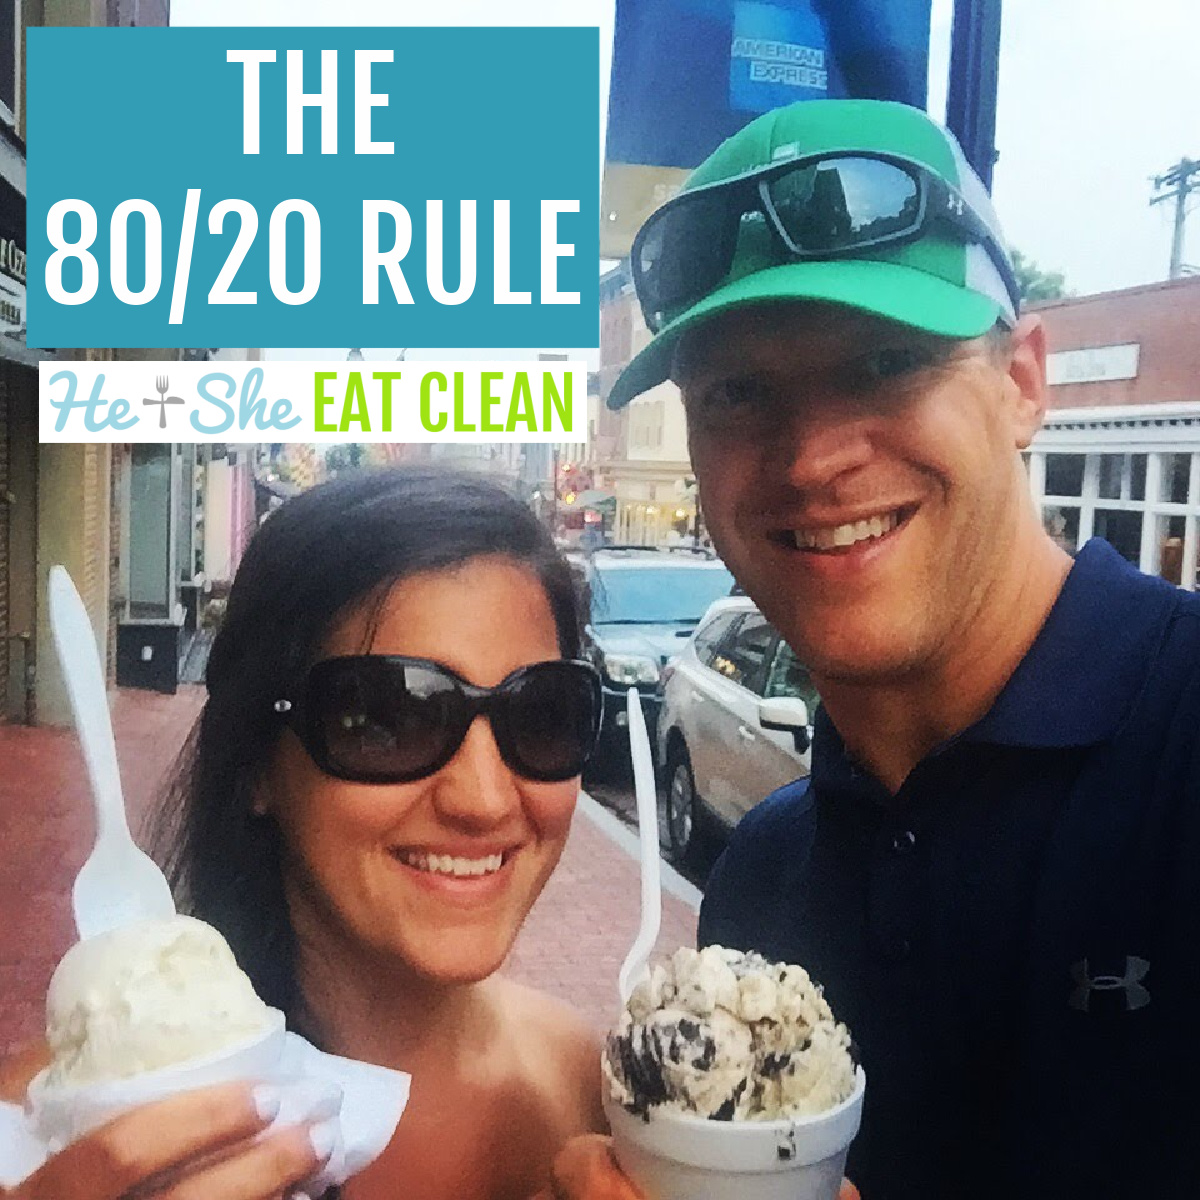 male and female holding ice cream smiling at the camera. text reads the 80/20 rule